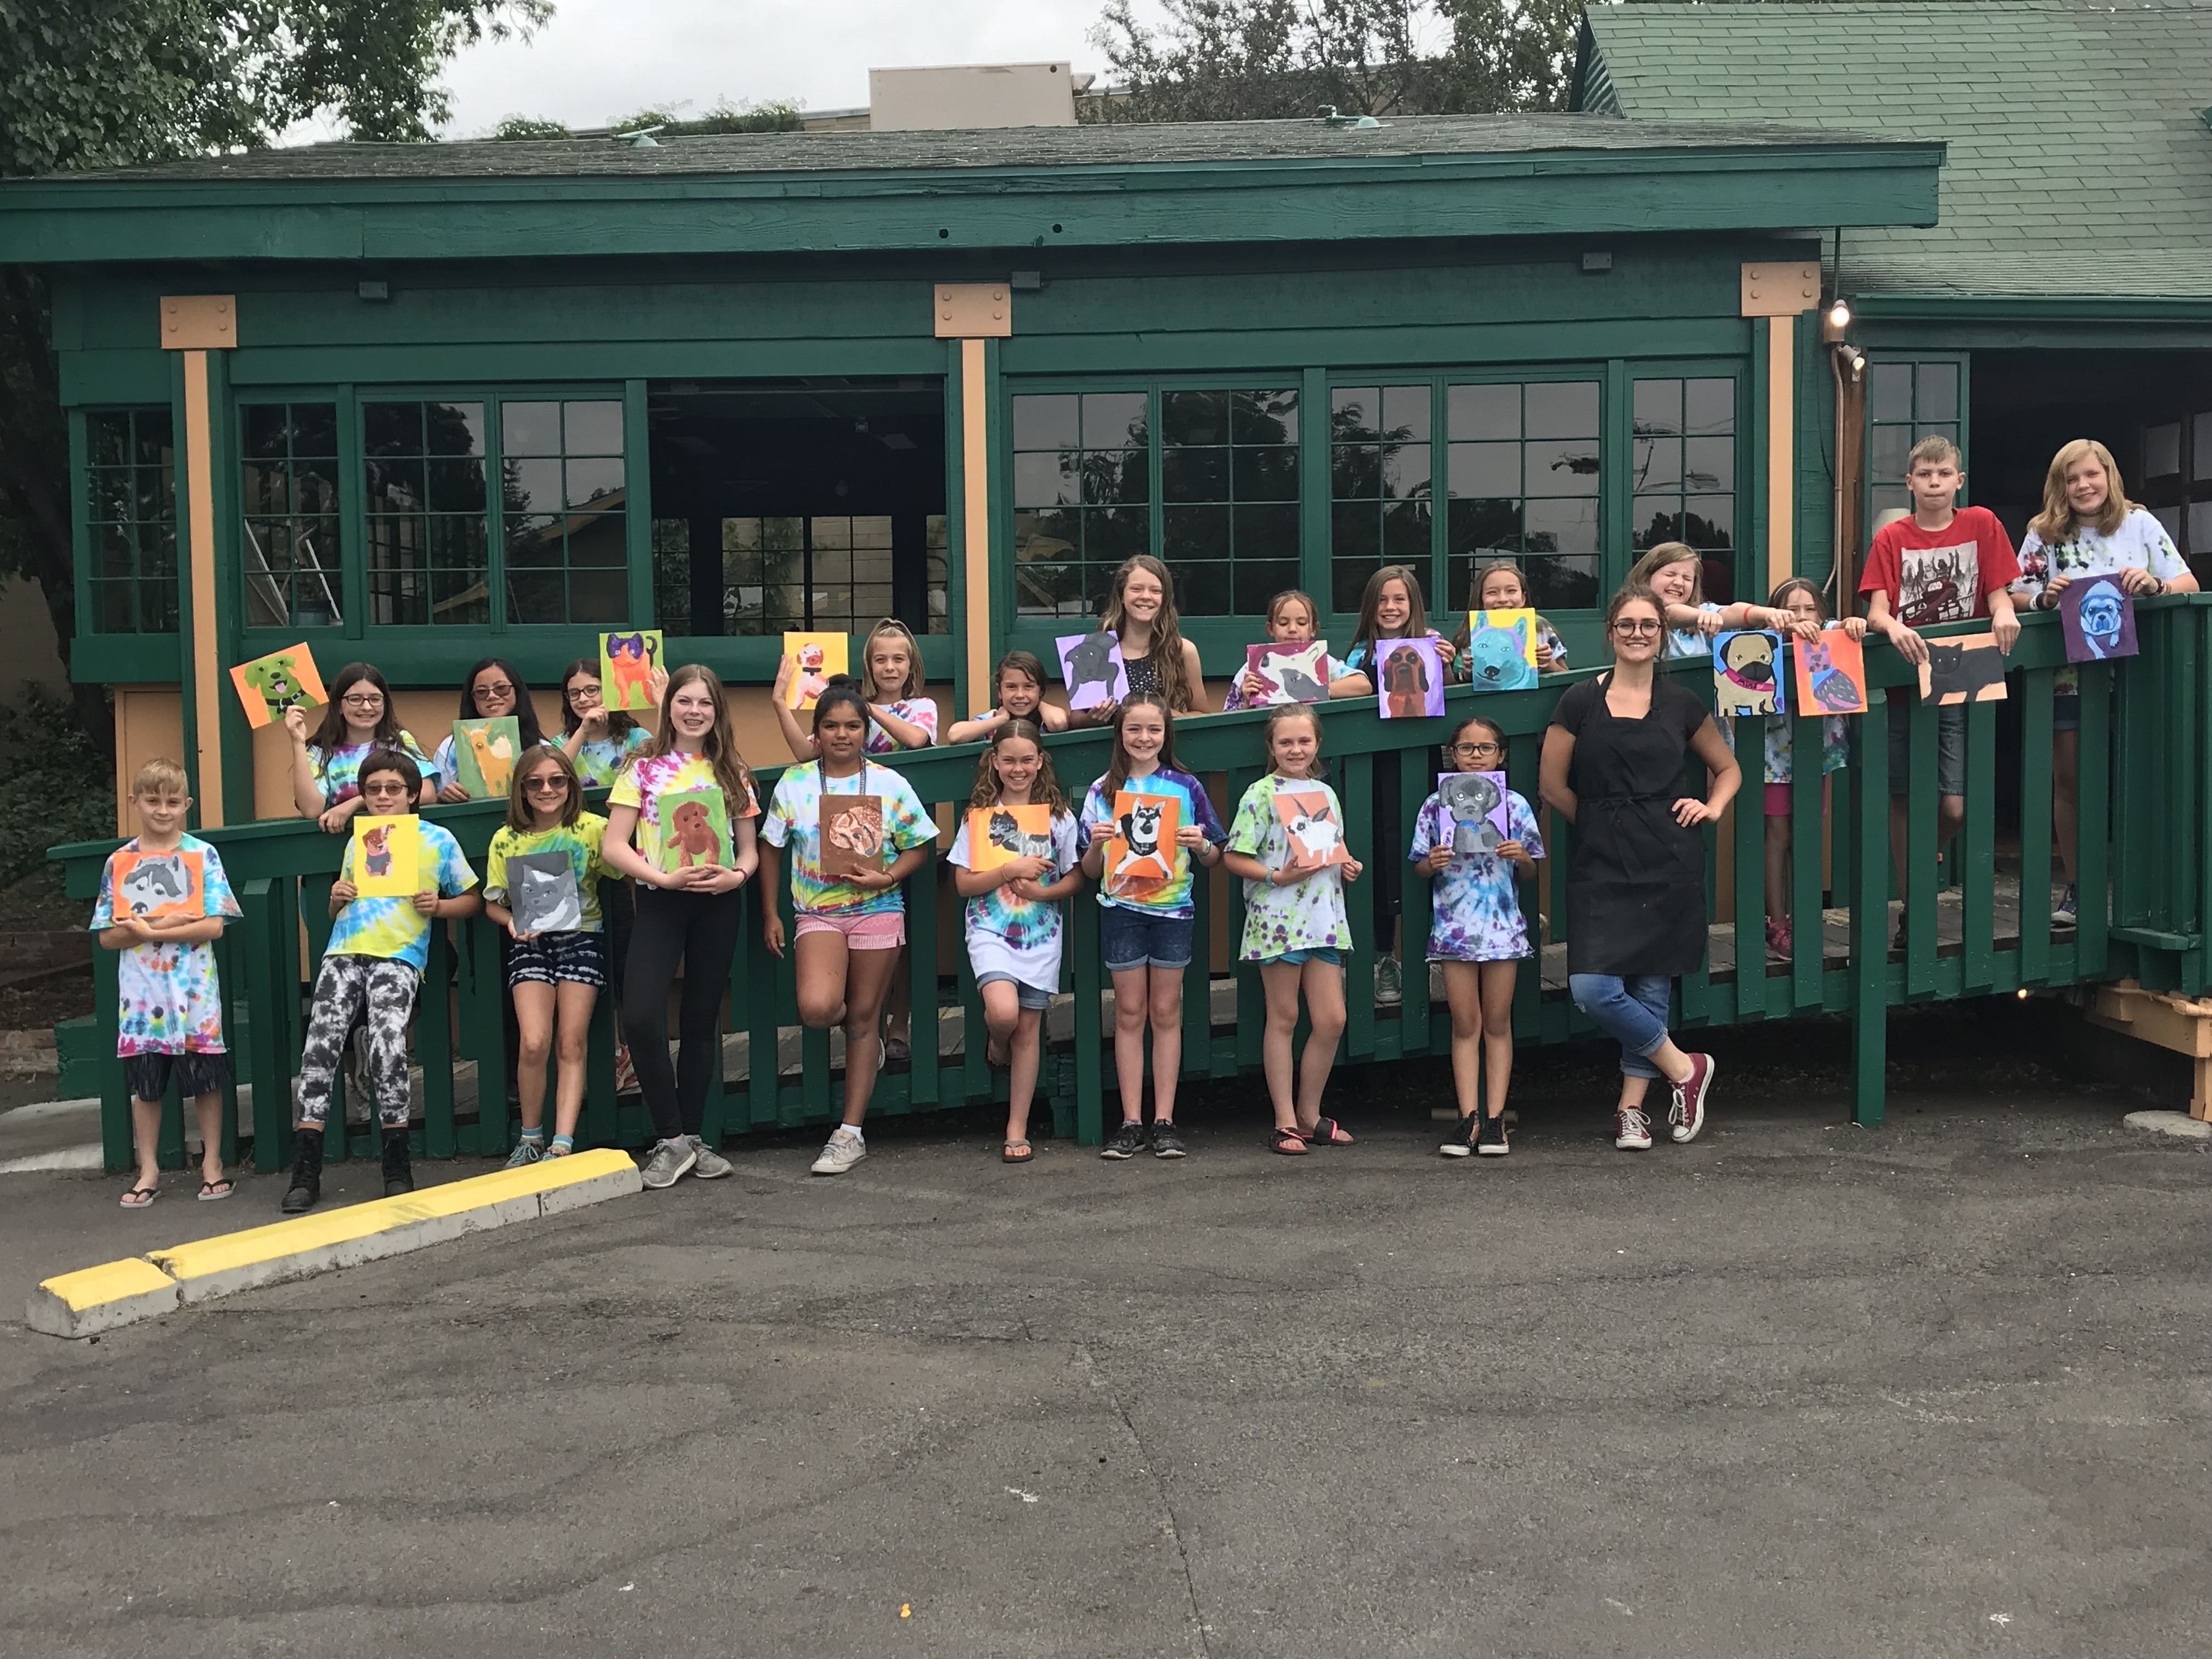 SOLD OUT – Sign up here for waitlist: Creative Kids Summer Camp – July 12-16 afternoon session (1-5 p.m. M-Fri, $185)